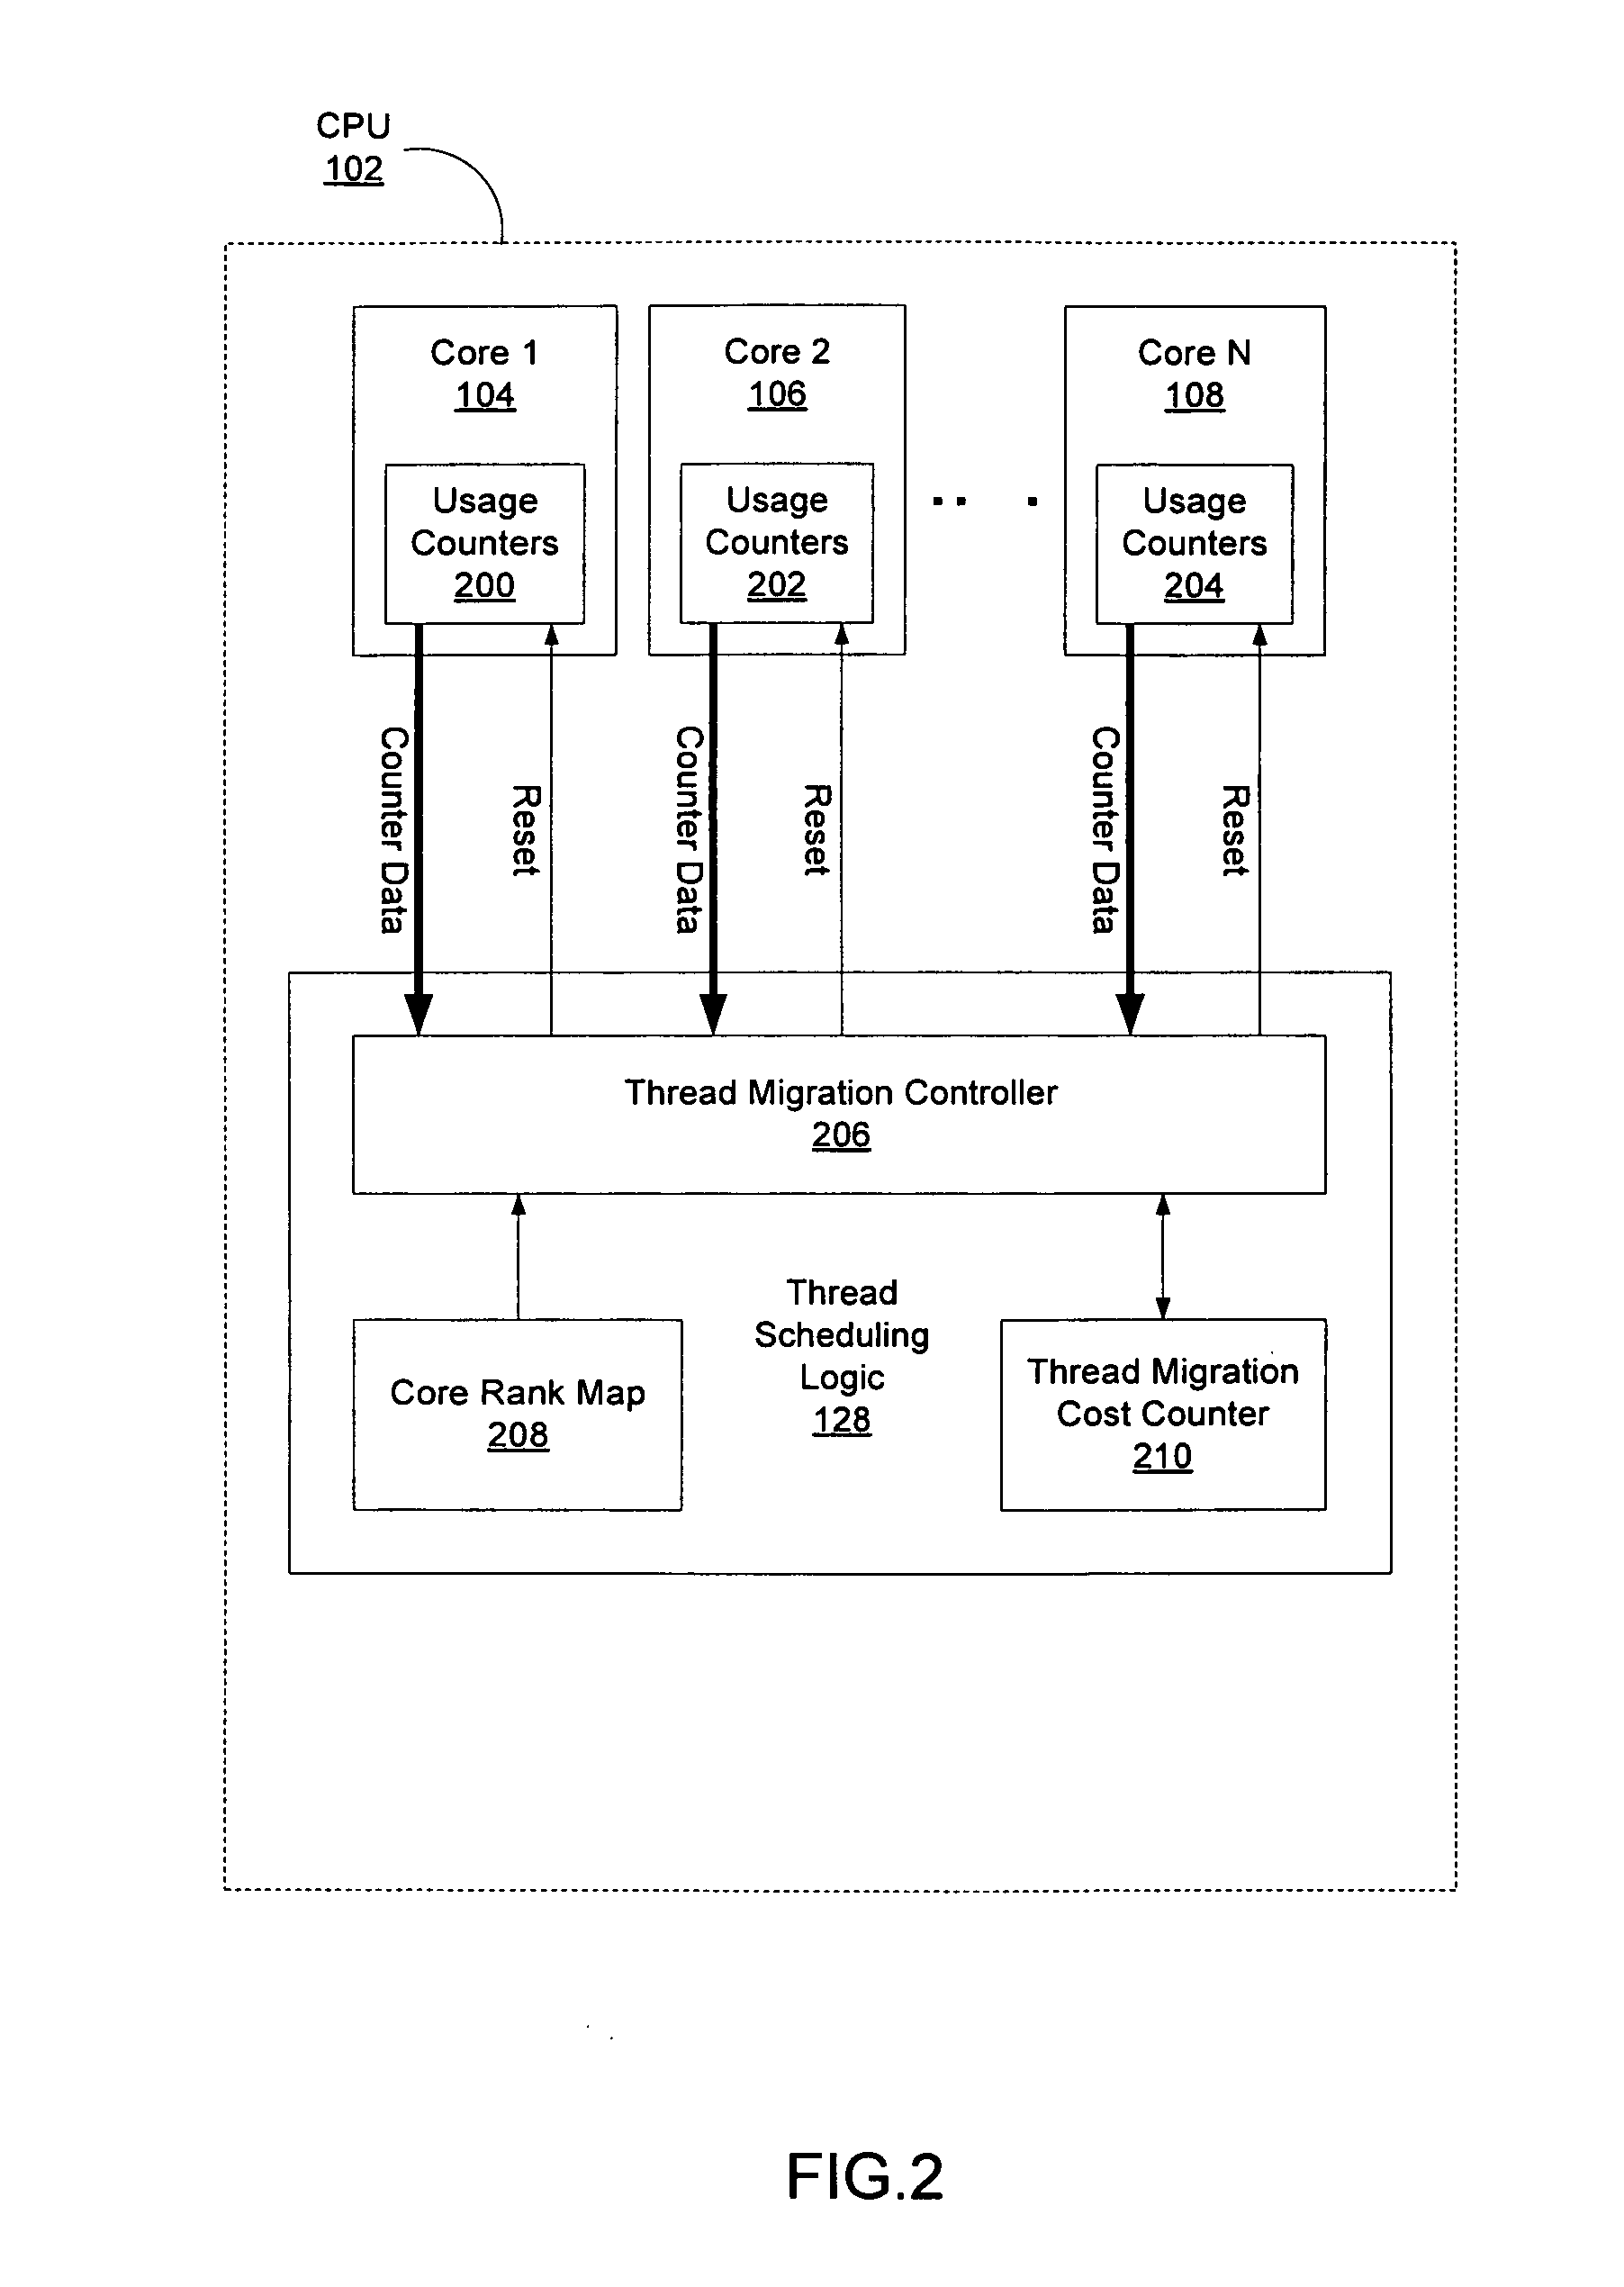 Hardware support for thread scheduling on multi-core processors